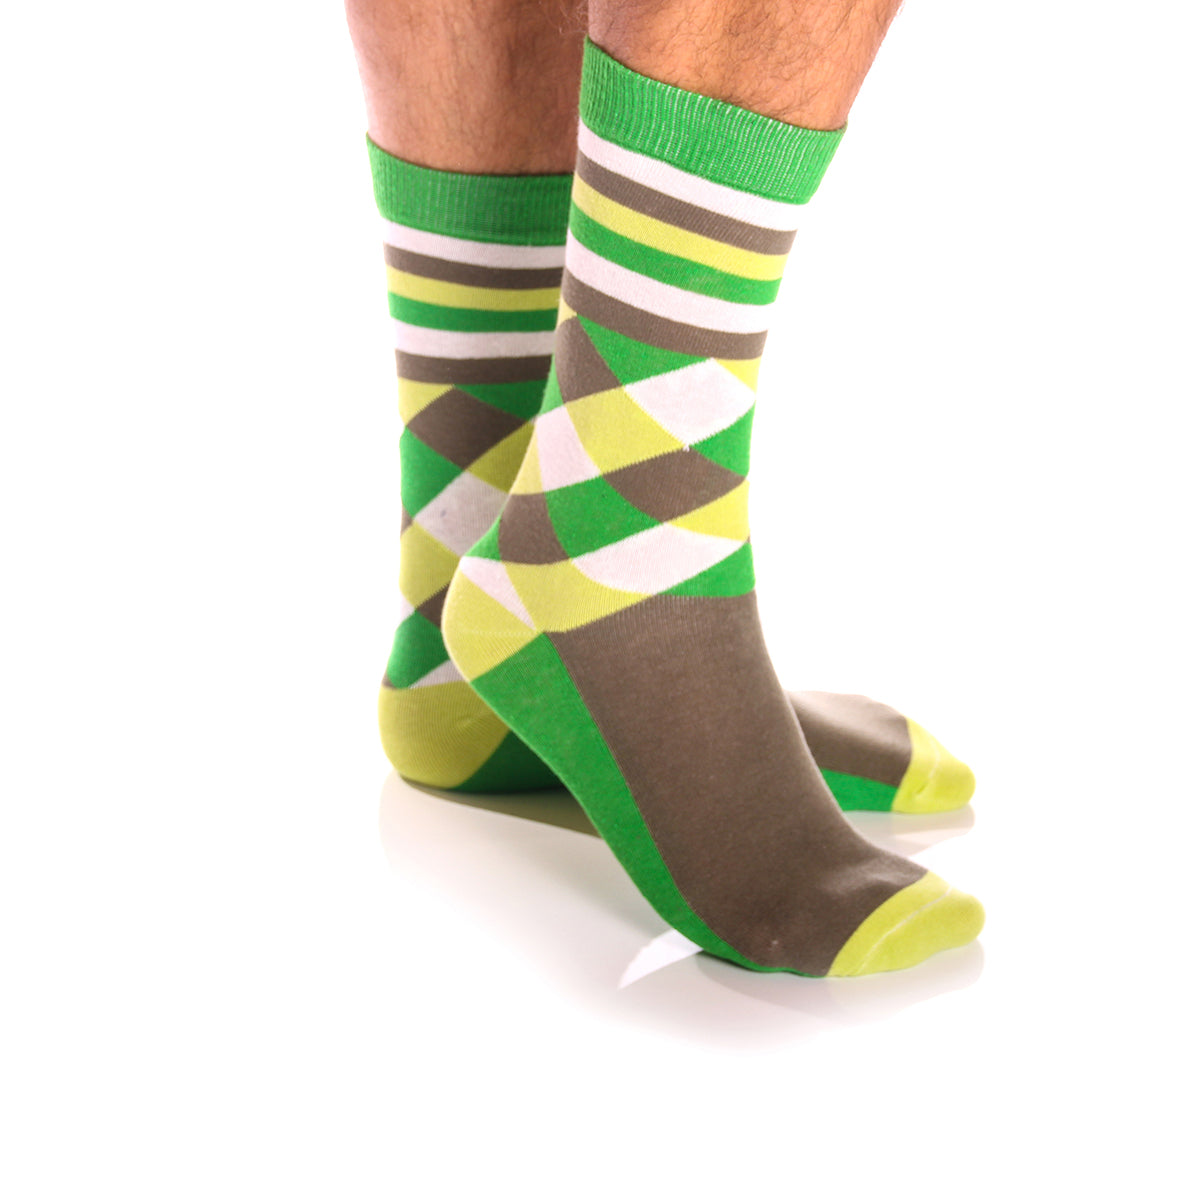 Green Grey And White Plain Five Color Mens Colorful Crew Socks Premium Amedeo Exclusive